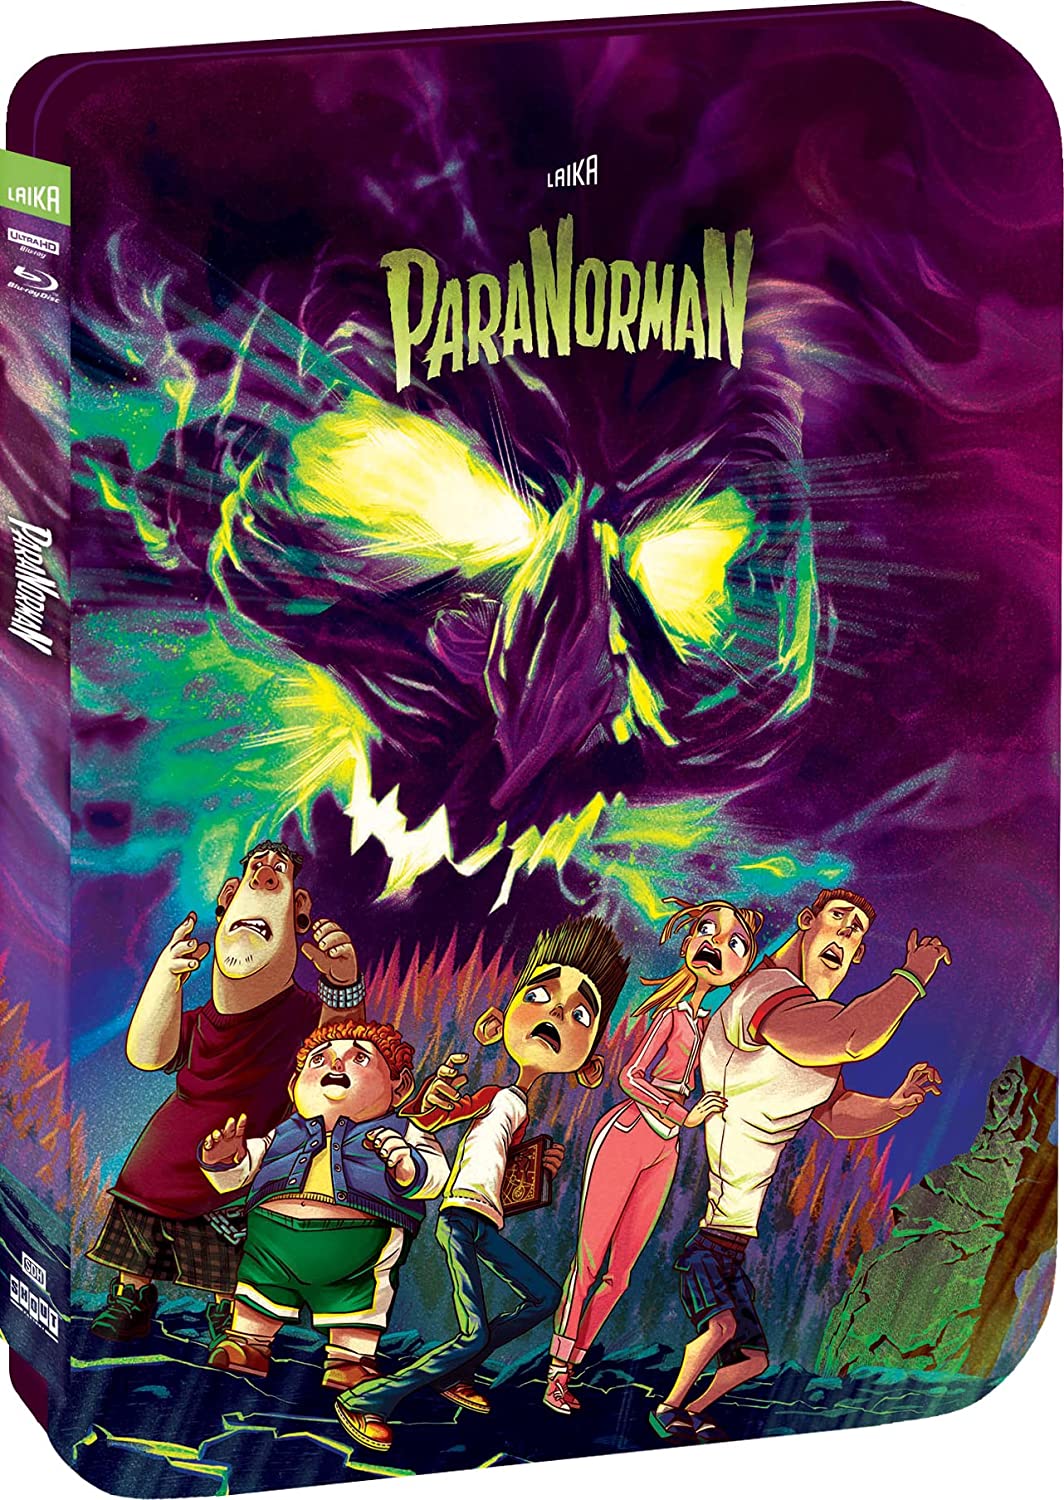 ParaNorman Limited Edition Shout Factory 4K UHD/Blu-Ray Steelbook [NEW]